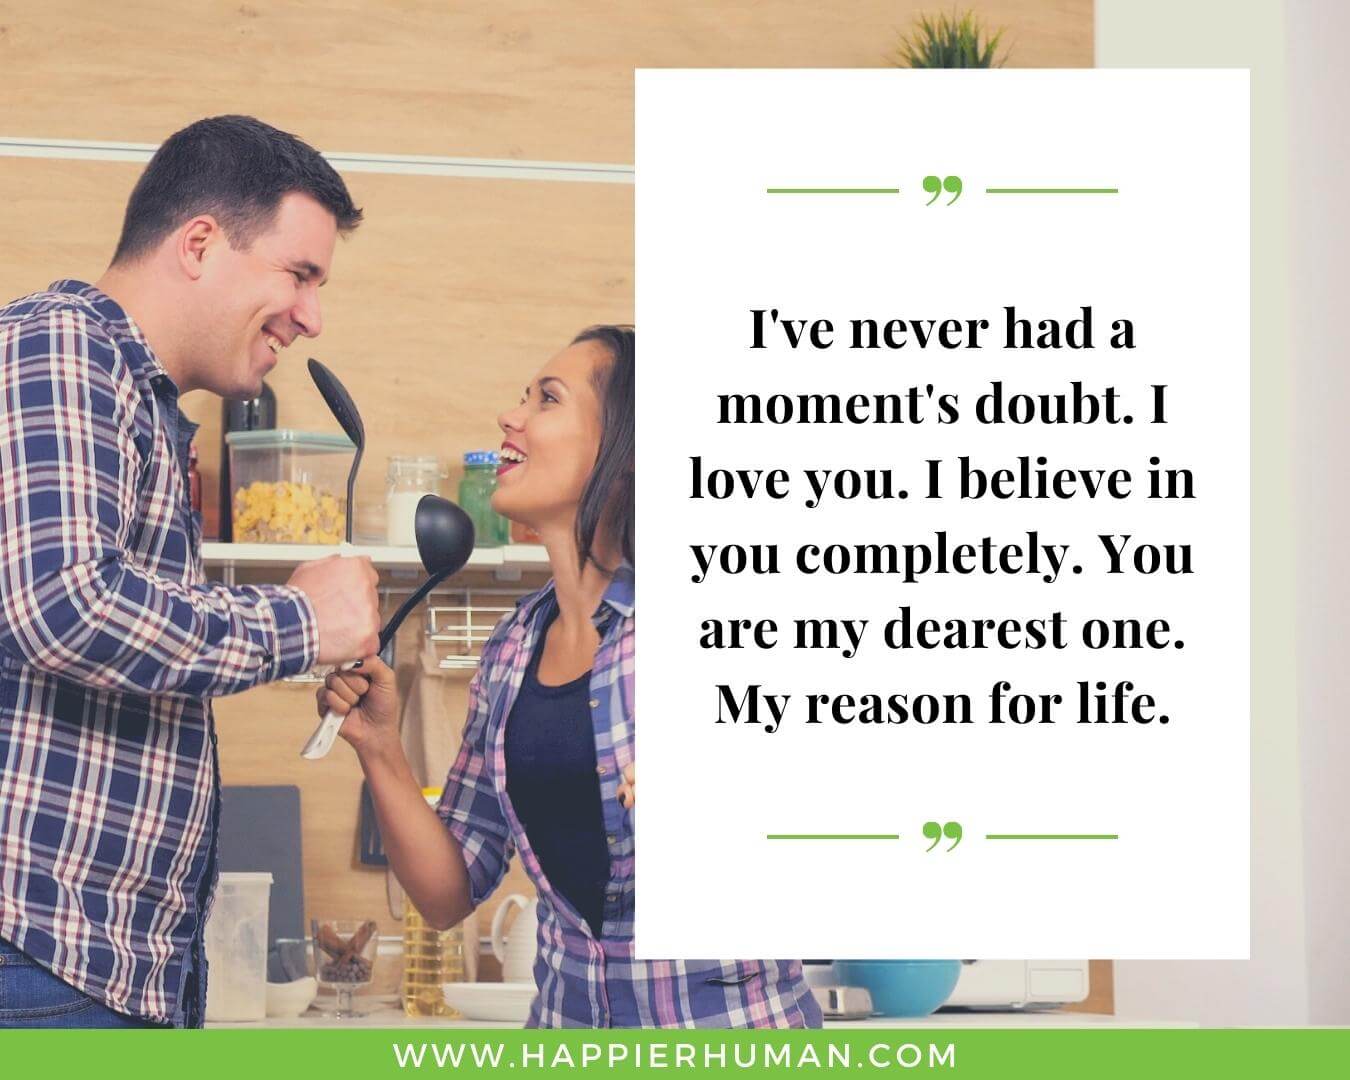 Unconditional Love Quotes for Her - “I've never had a moment's doubt. I love you. I believe in you completely. You are my dearest one. My reason for life.”